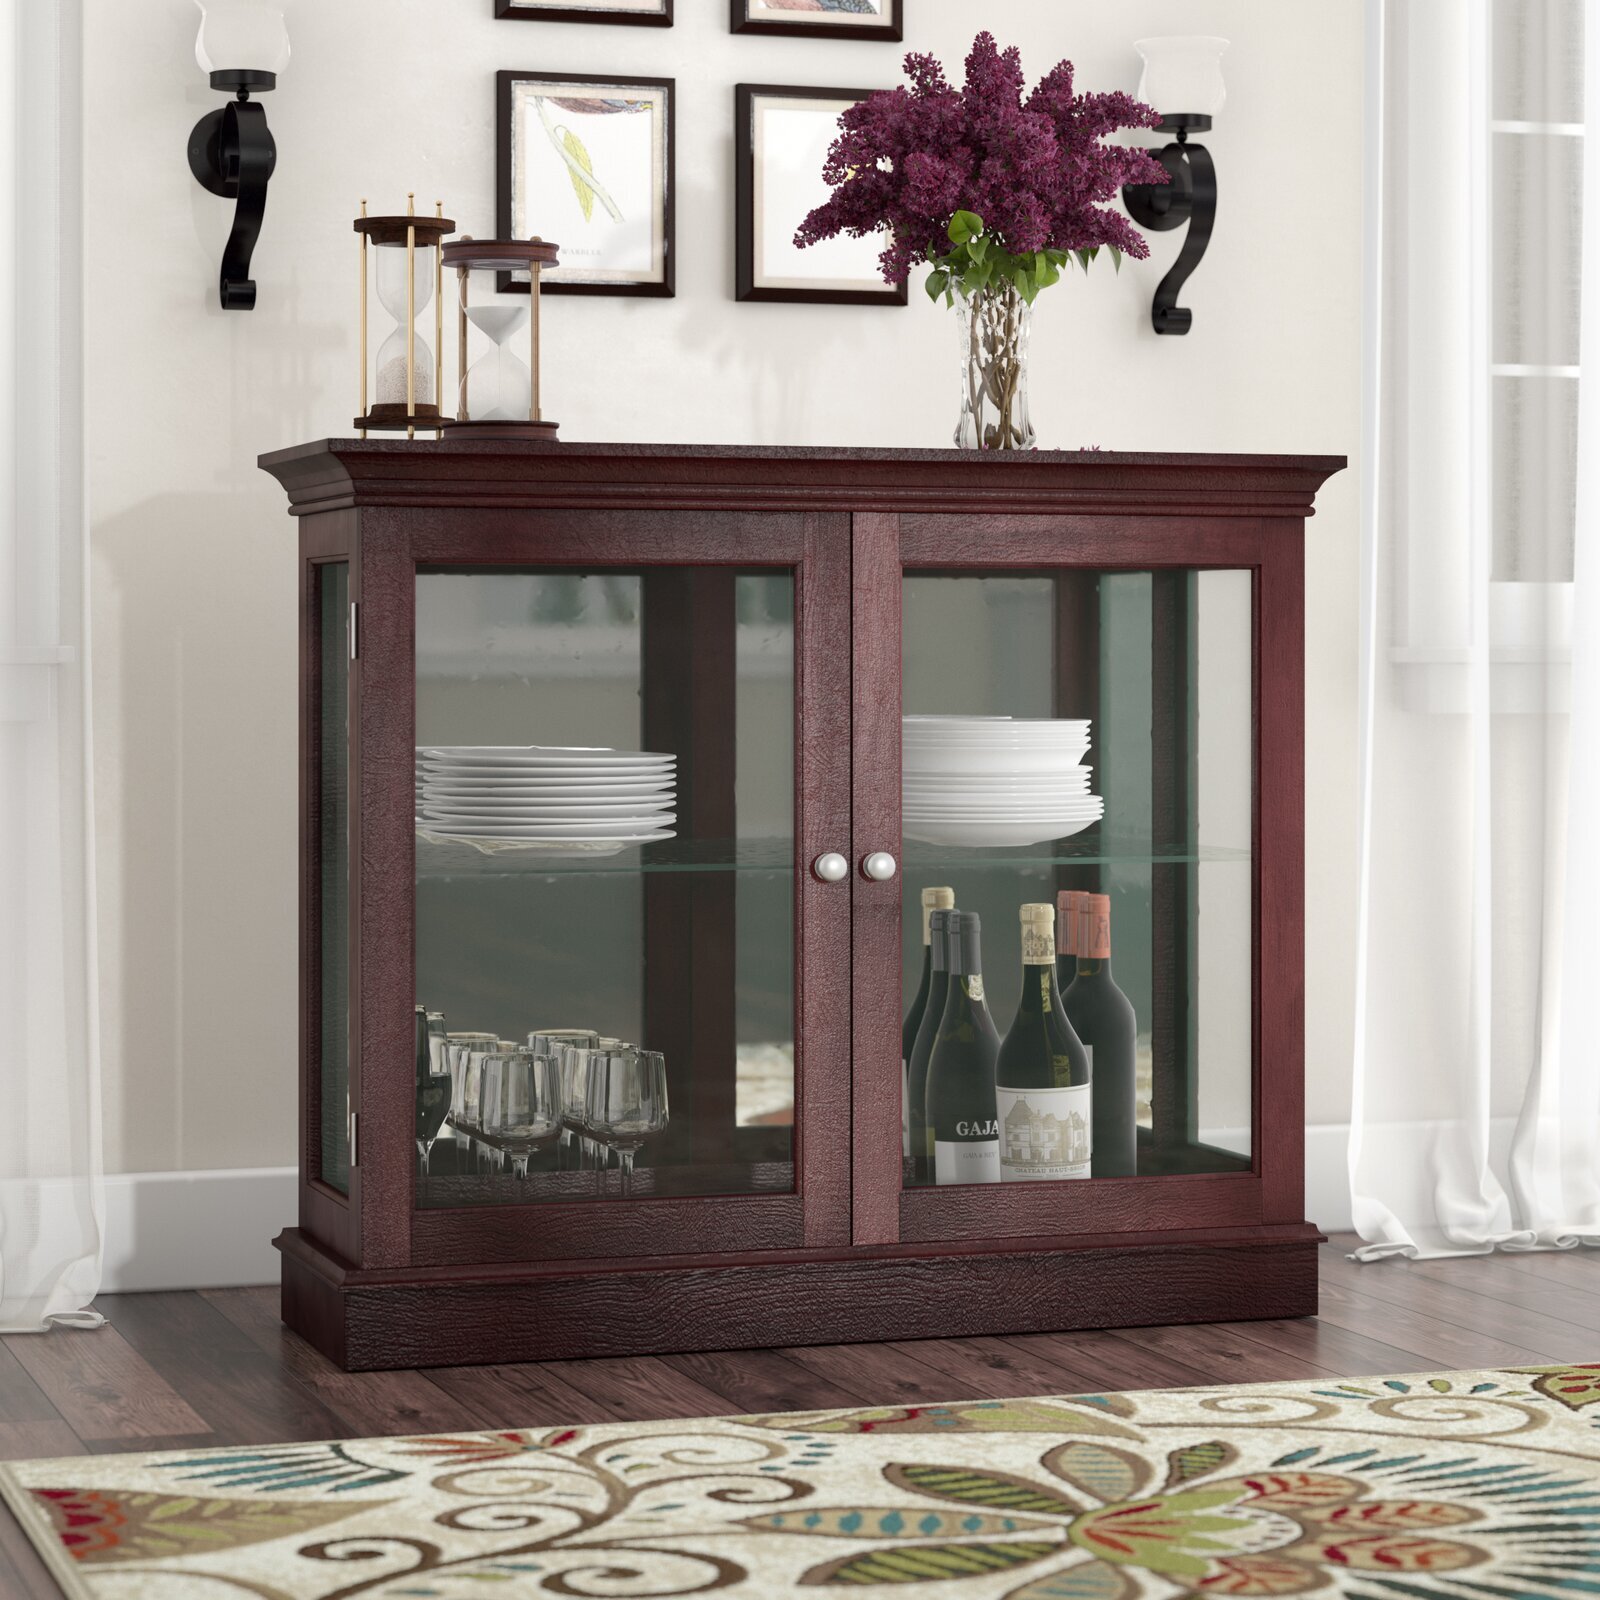 Cherry wood bookcase with glass doors